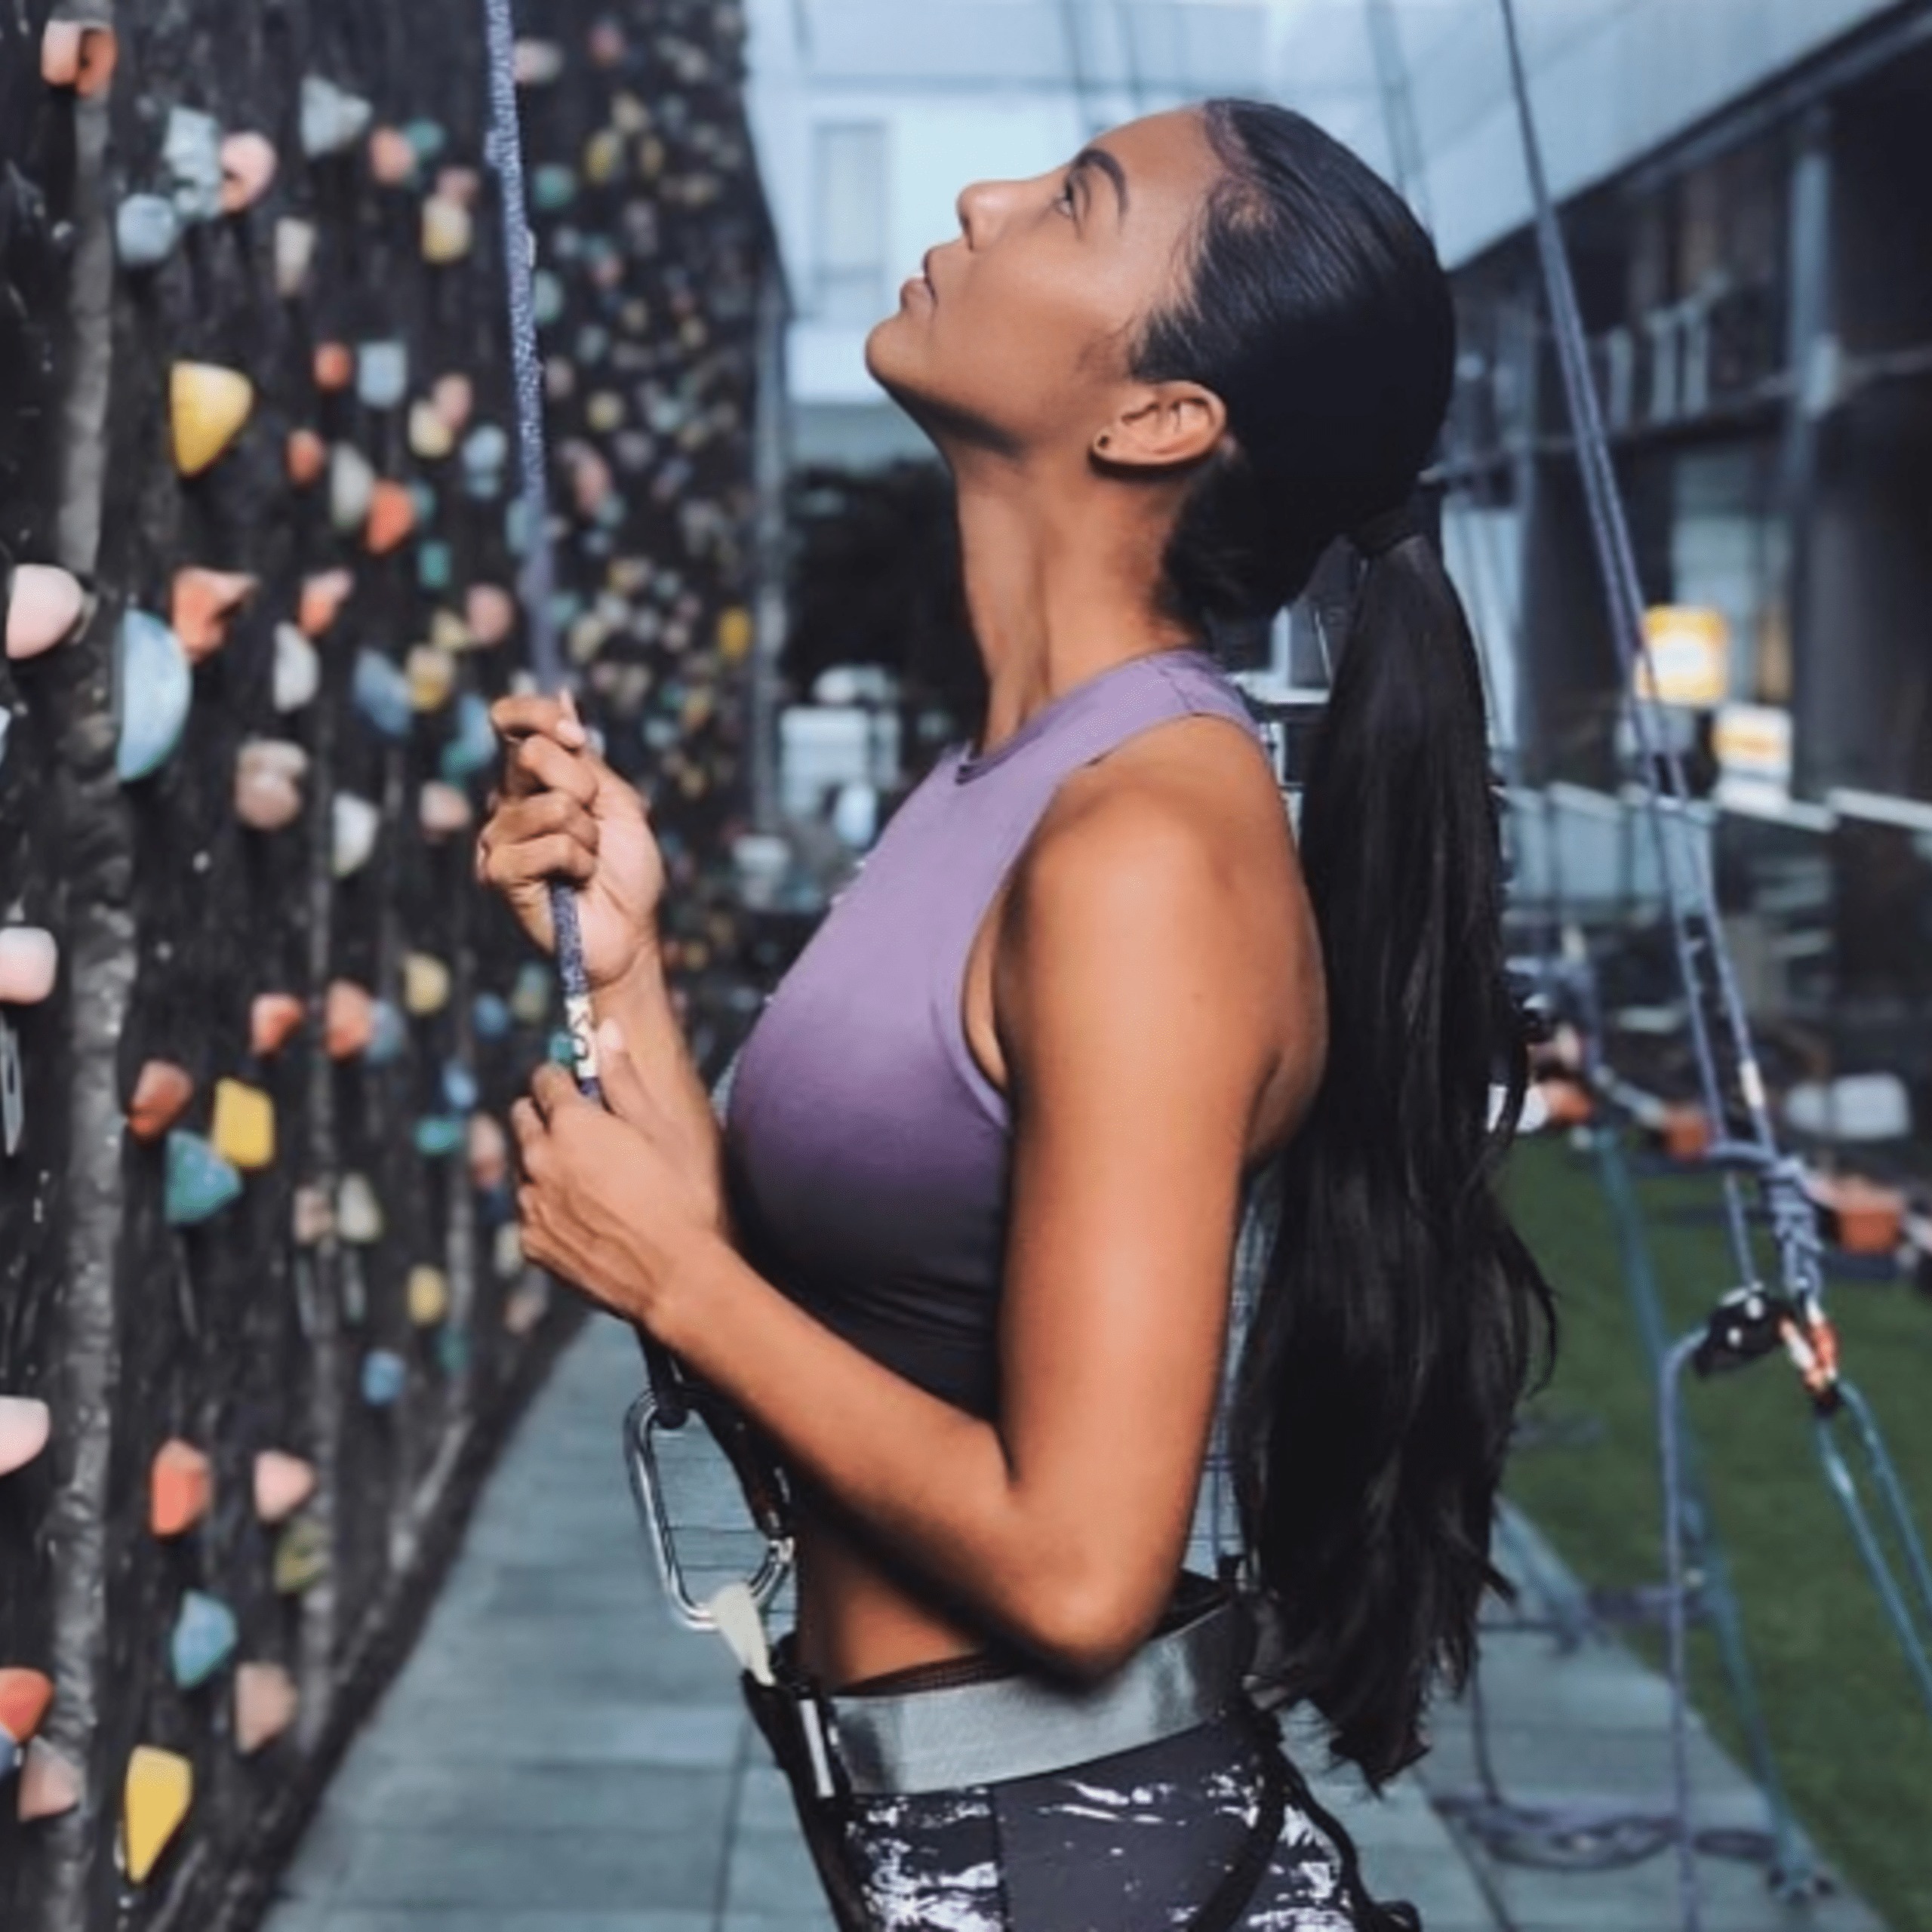 The Best Indoor Rock Climbing and Bouldering Spots That Fitness Influencers Visit